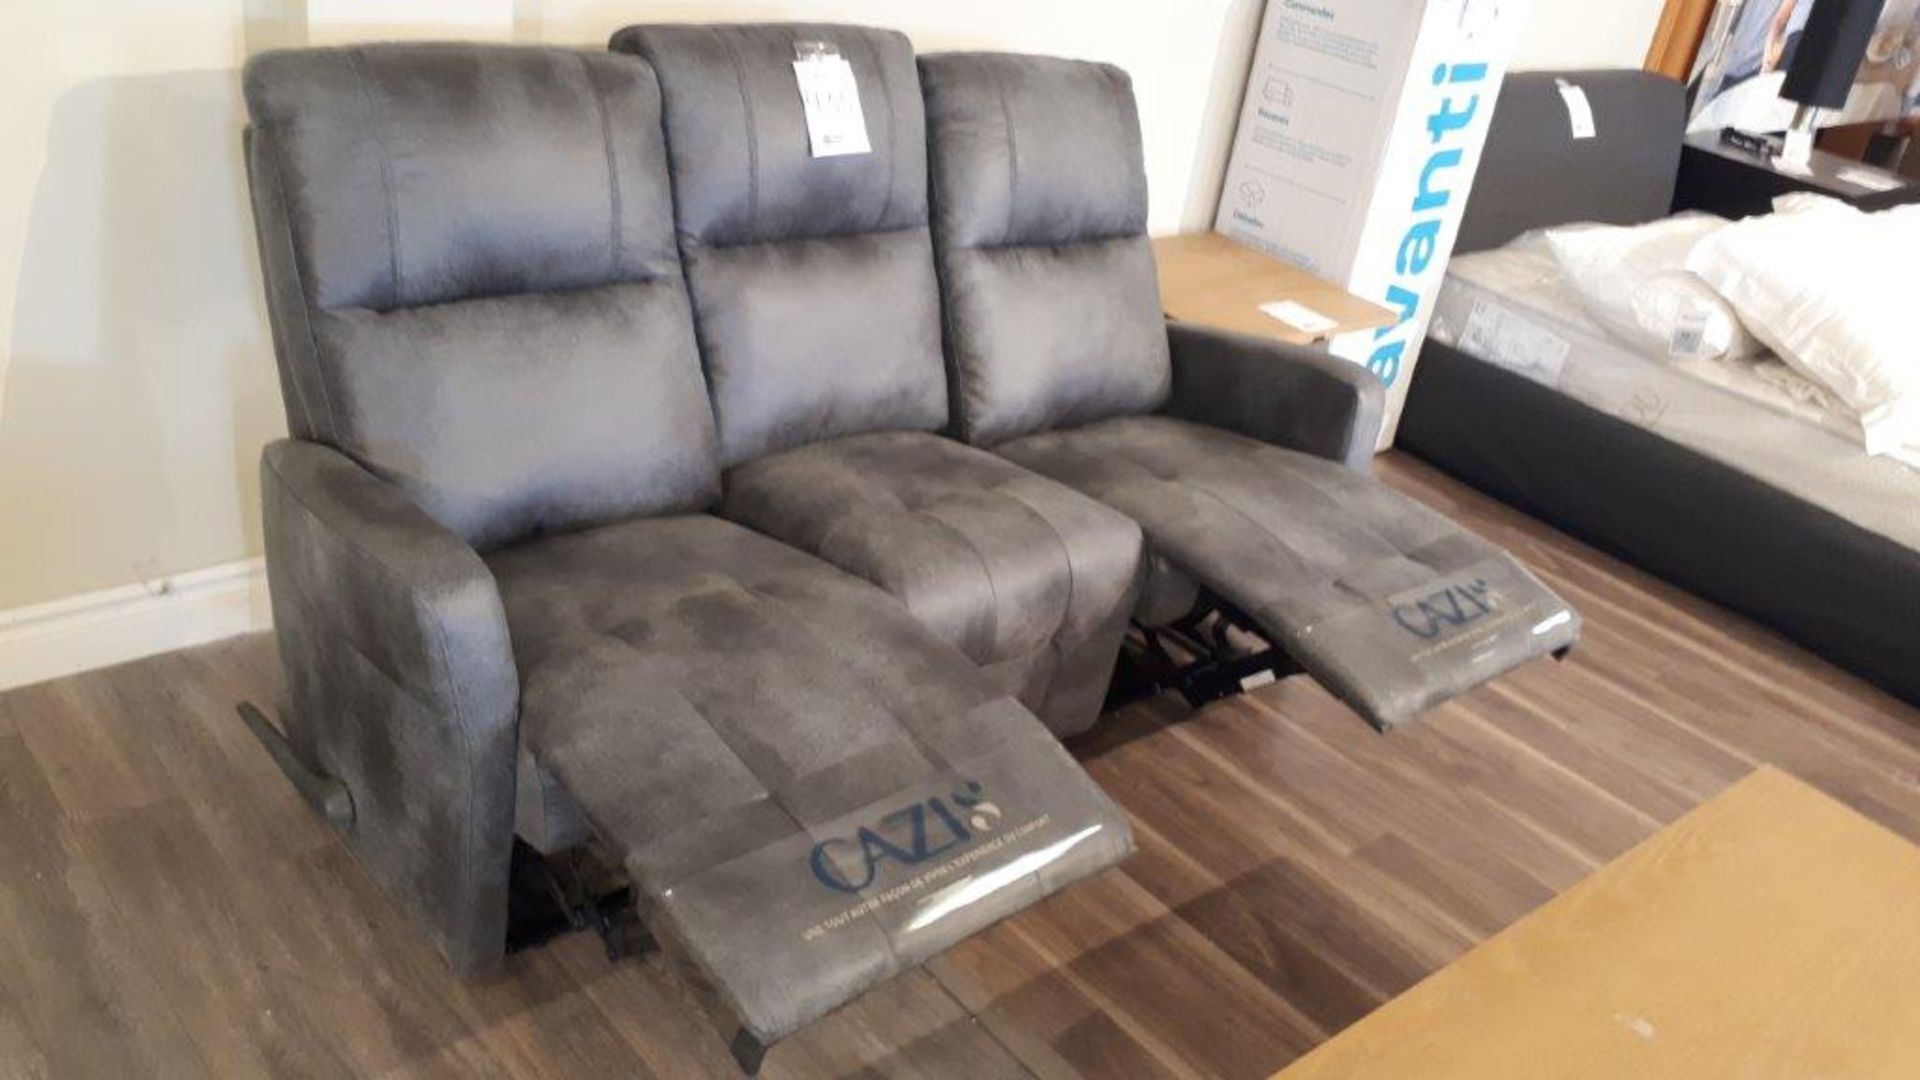 Cazi leather (bicast) recliner couch, 3 seat - Image 2 of 2